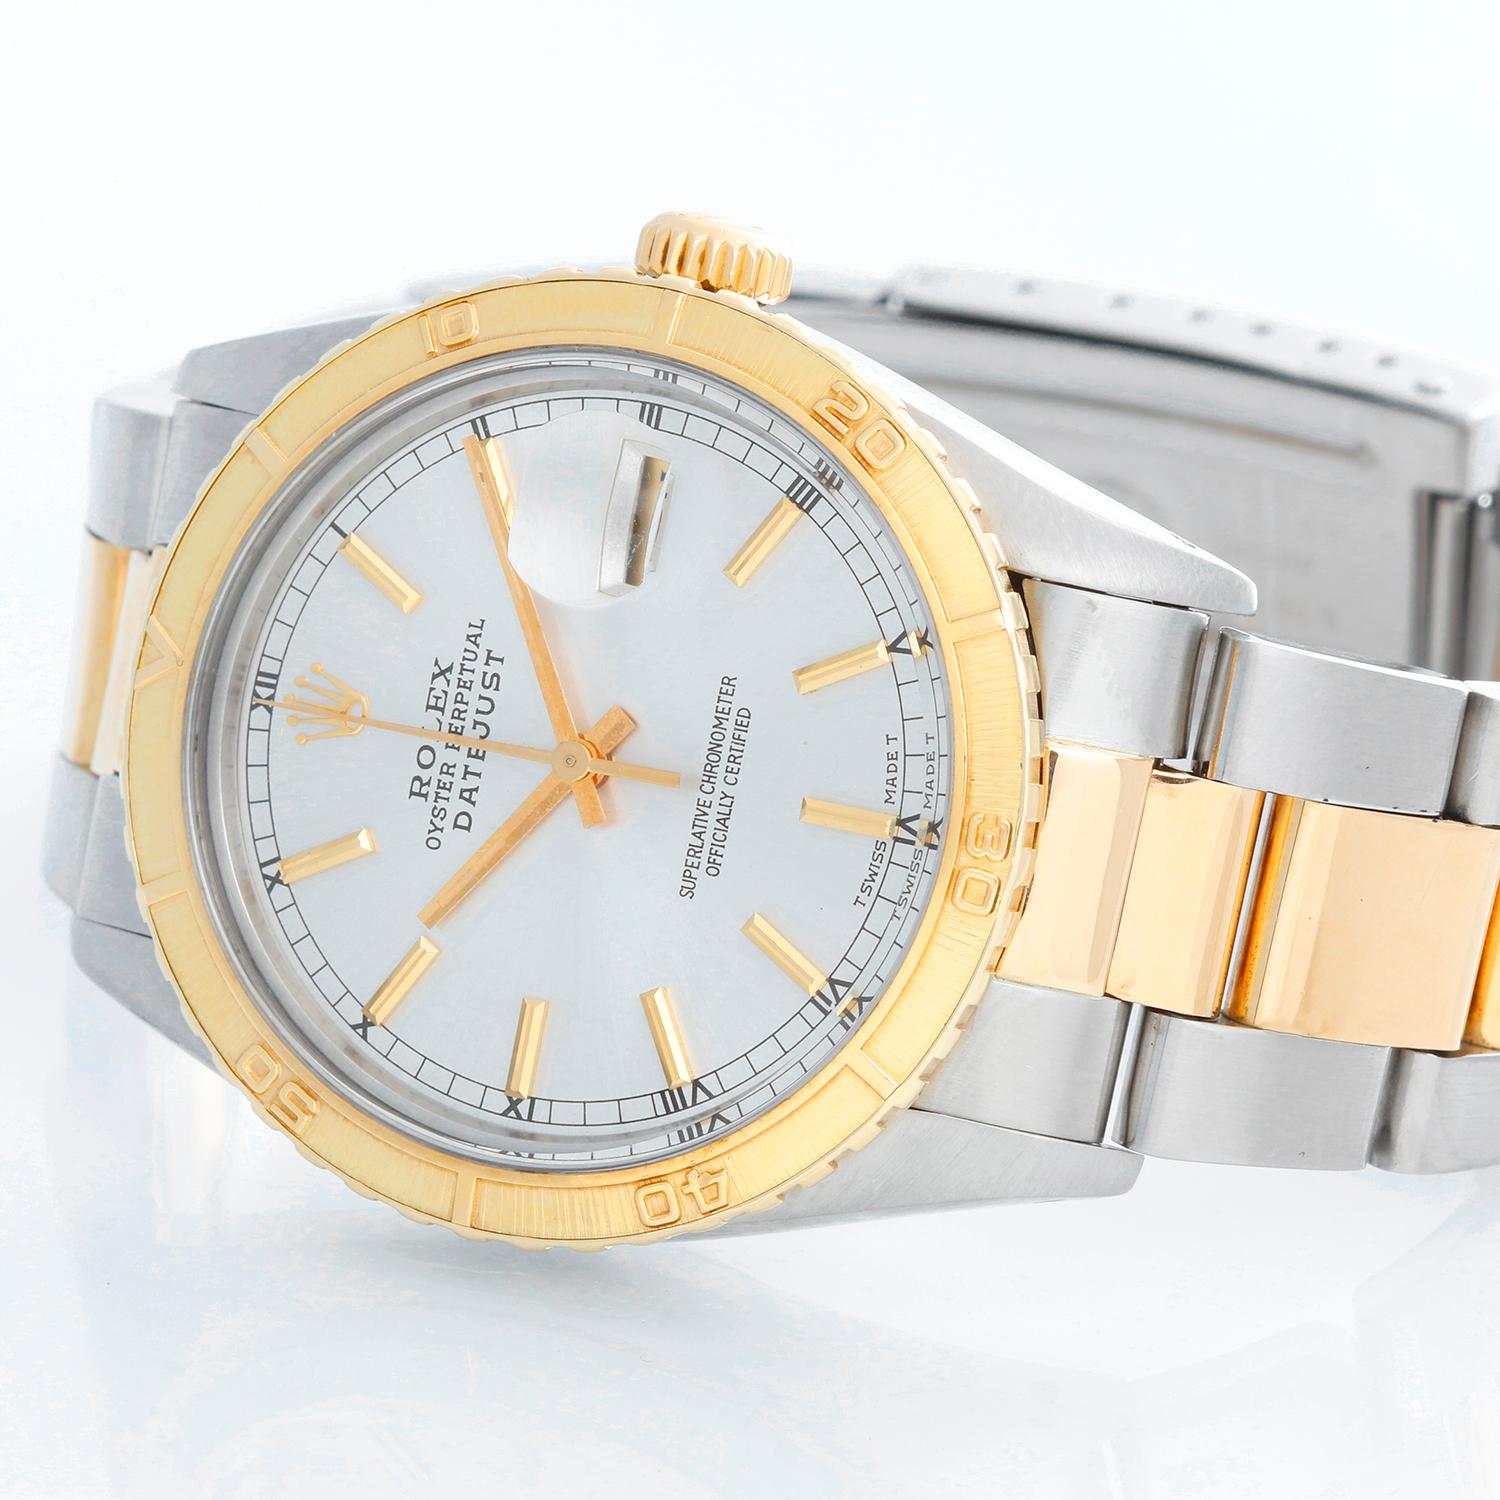 Rolex Turnograph Men's 2-Tone Watch 16253 - Automatic winding, Quickset, acrylic crystal. Stainless steel case with 18k yellow gold bezel. Silver dial with raised gold markers. Stainless steel and 18k yellow gold Oyster bracelet. Pre-owned with